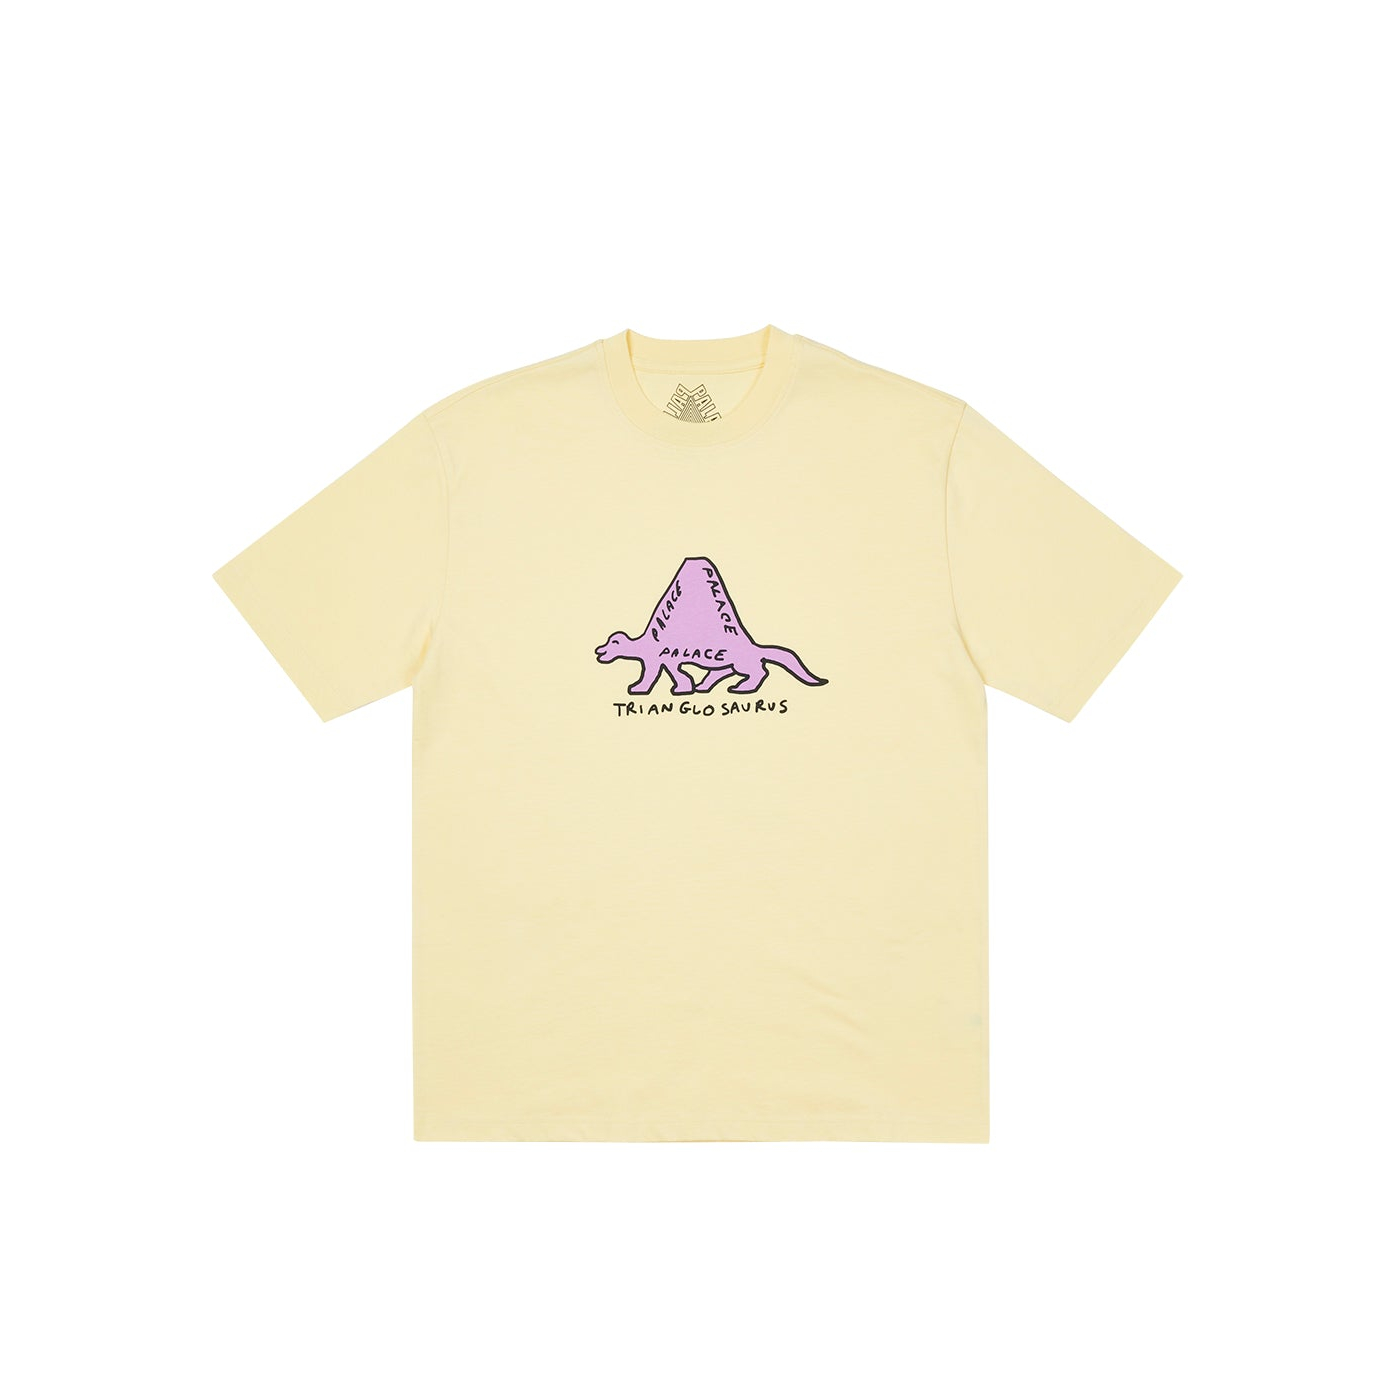 Thumbnail TRIANGLOSAURUS T-SHIRT MELLOW YELLOW one color